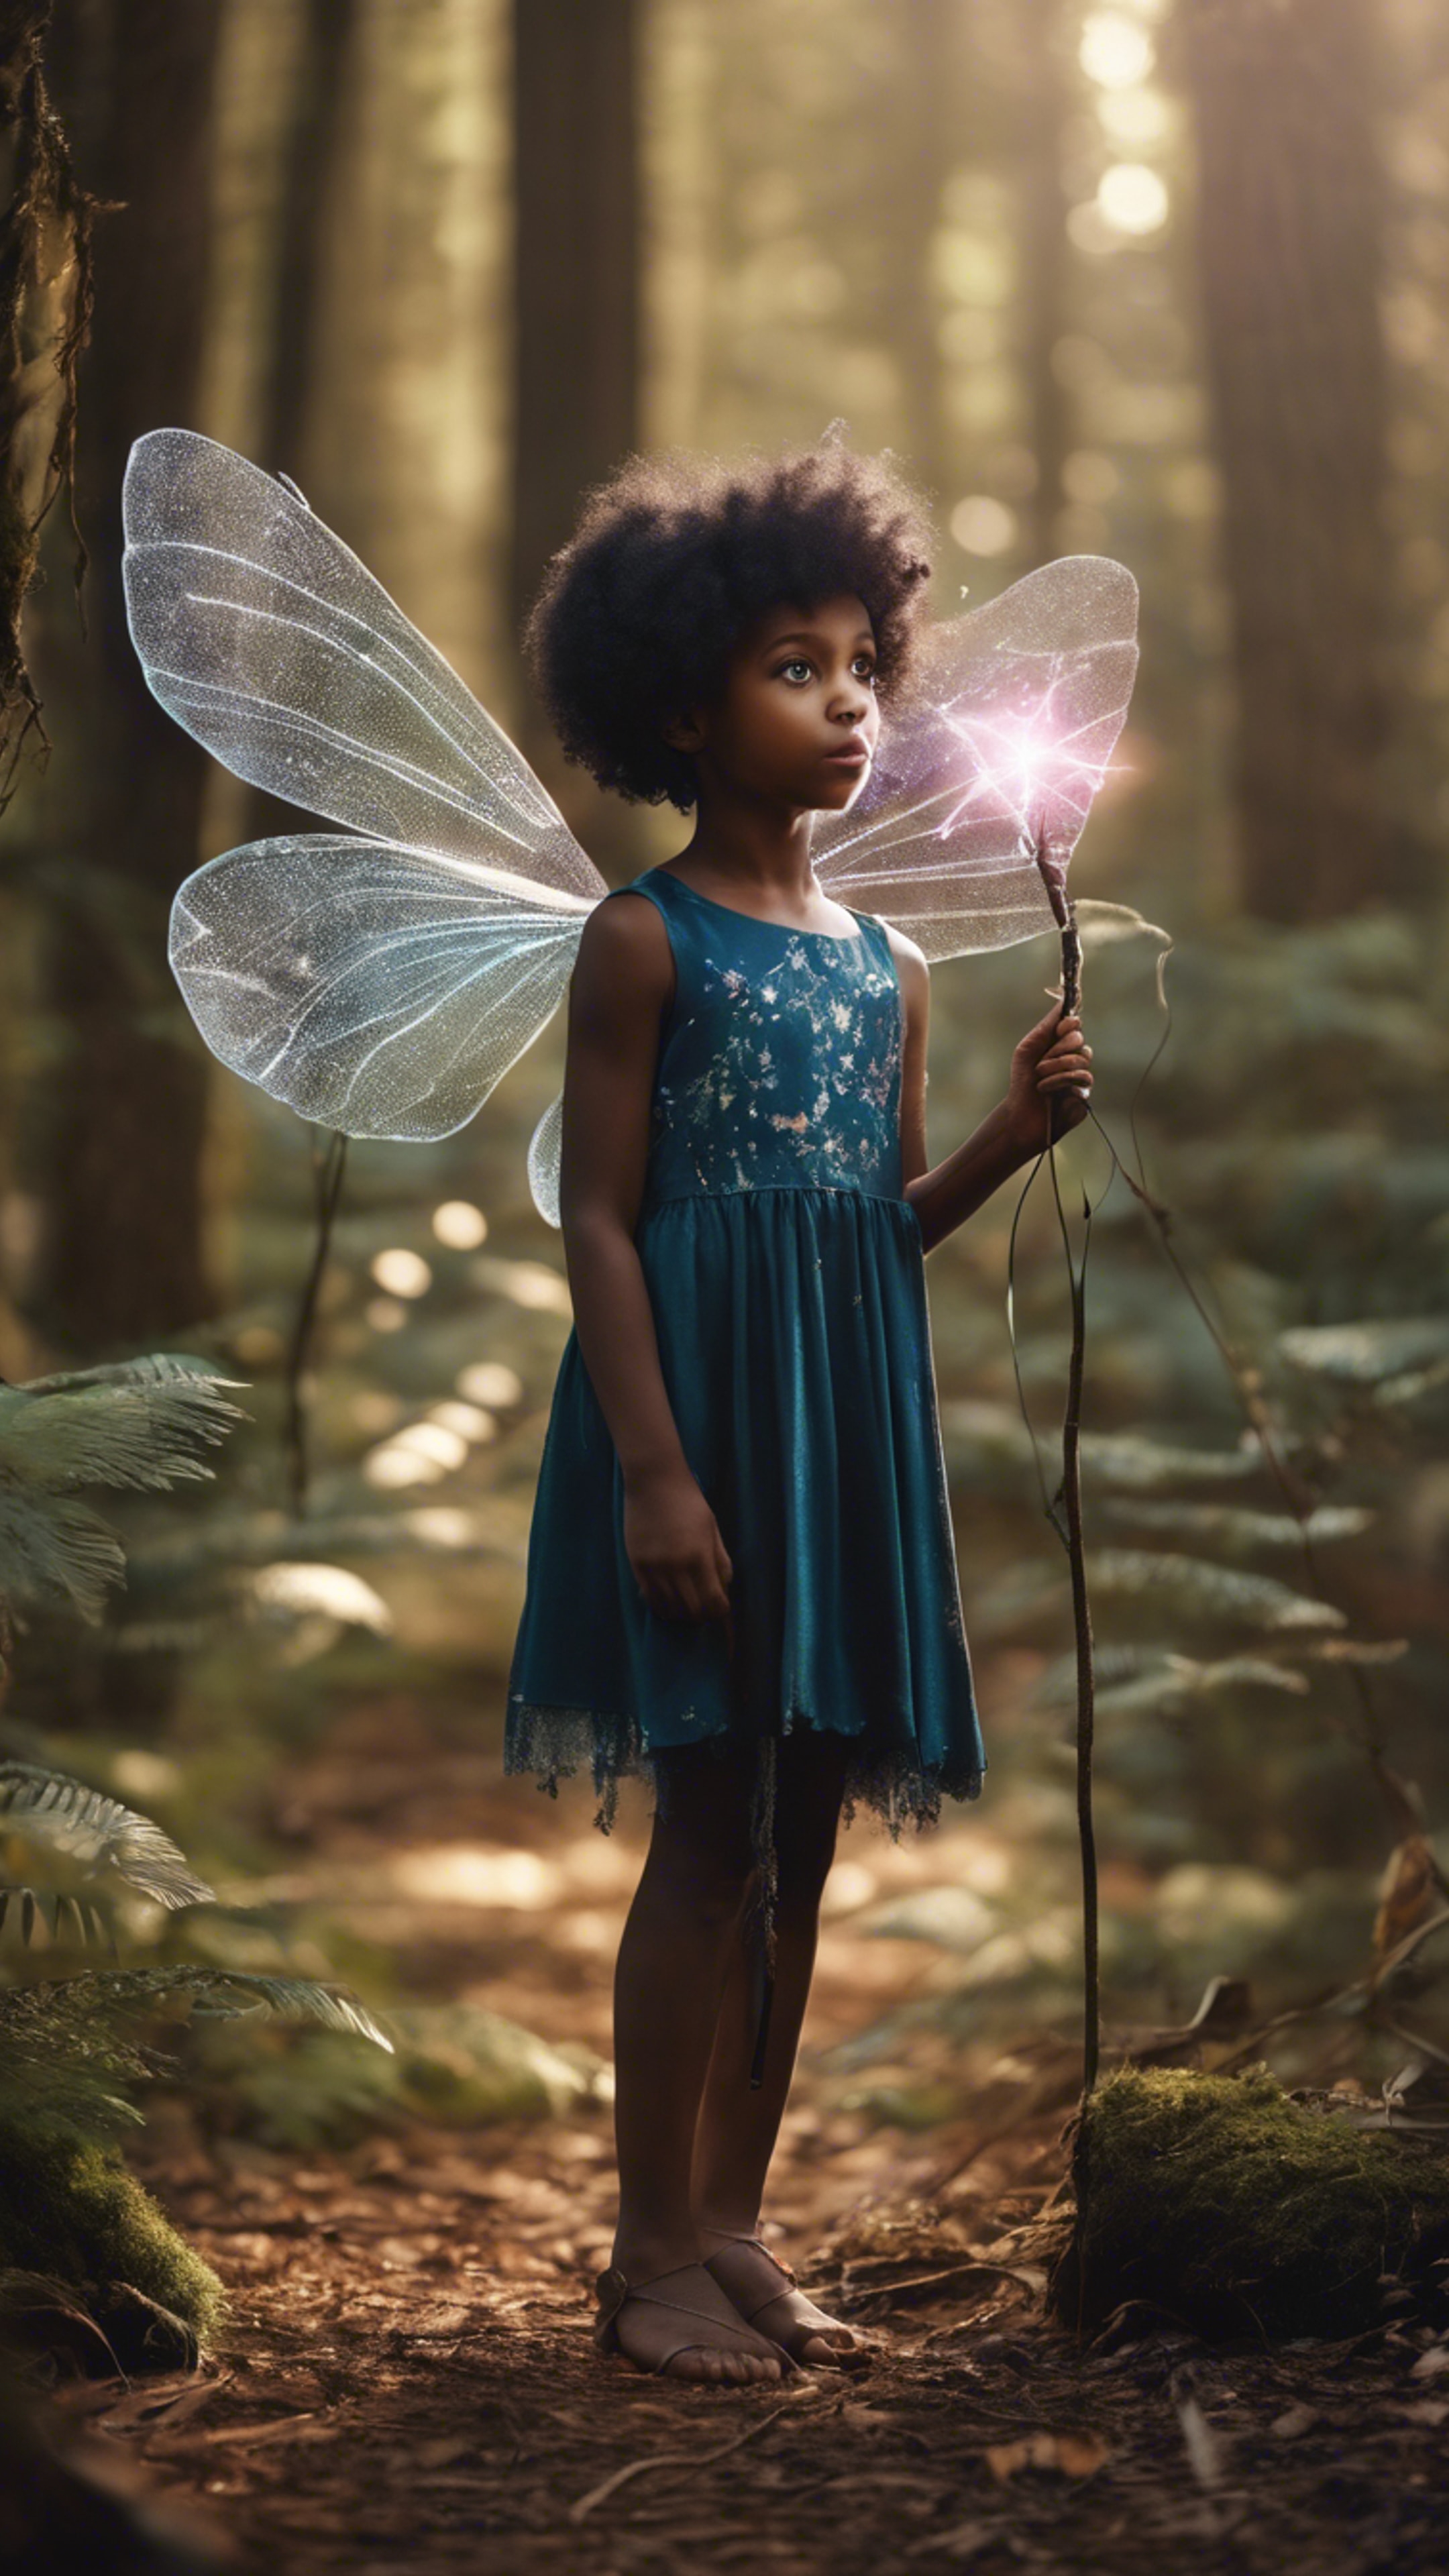 A cute image of a black girl wearing fairy wings, holding a magic wand in a mystical forest. Papel de parede[6c77347a4892474c928d]